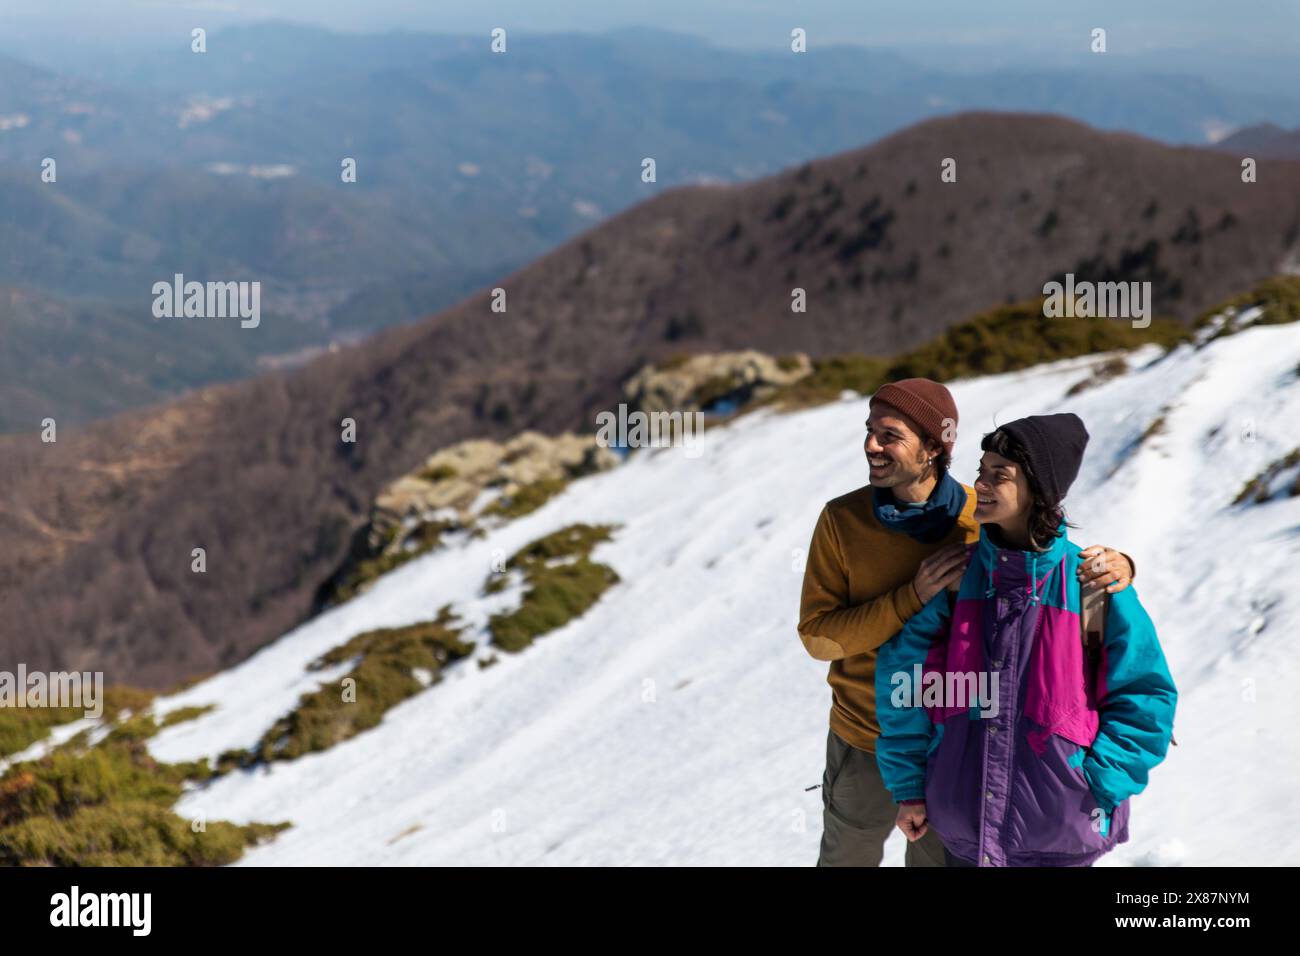 Smiling man standing with arms around woman on snowy mountain Stock Photo